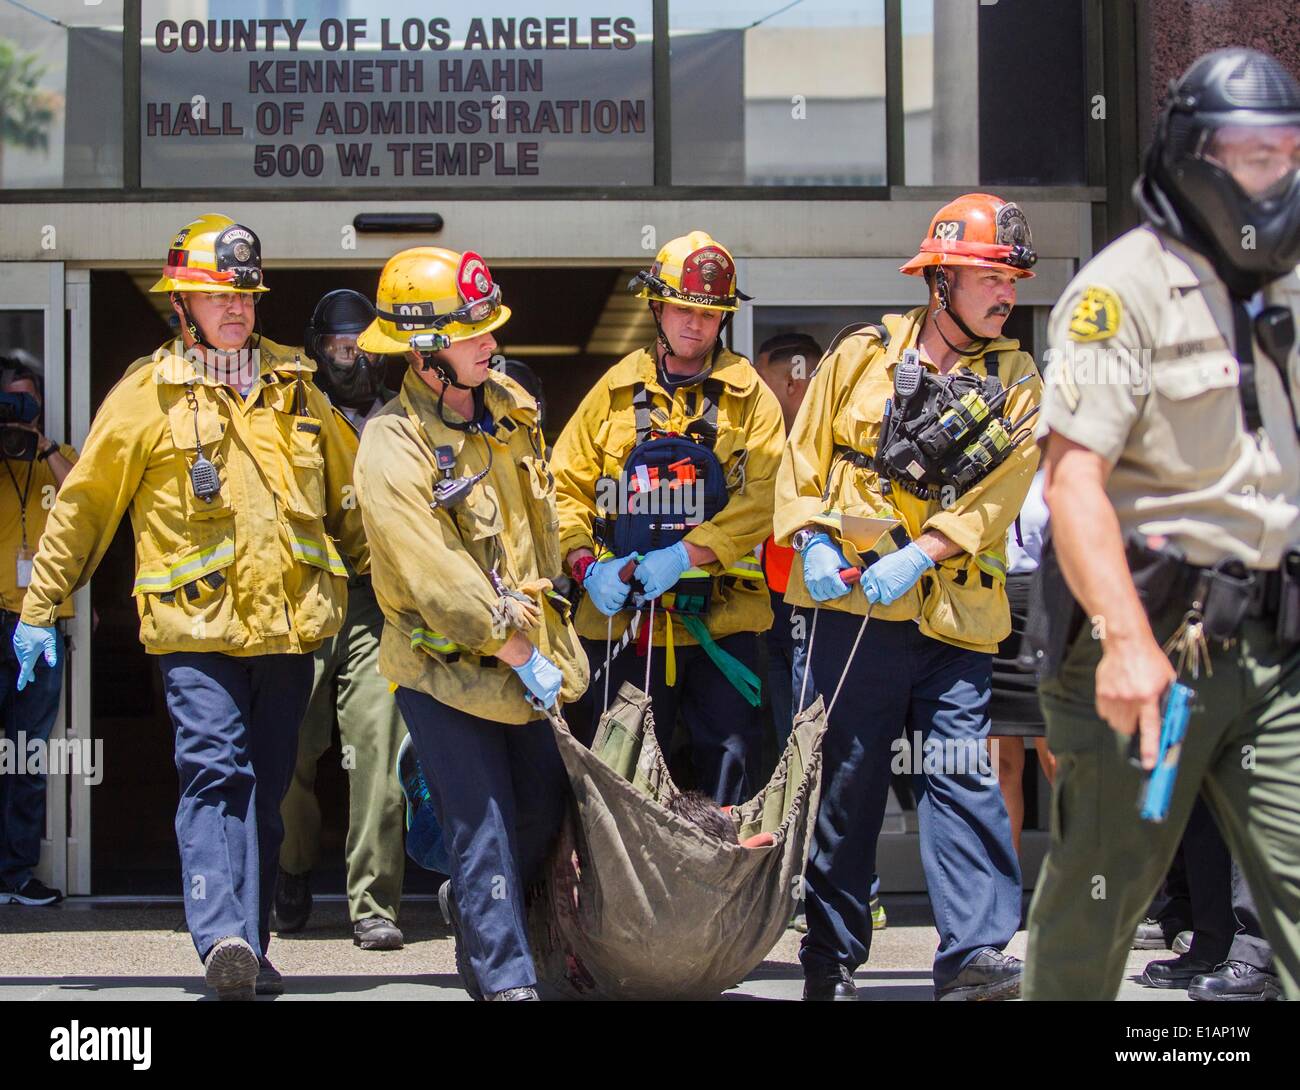 Los Angeles, USA. 28th May, 2014. Rescuers transfer a simulated victim out of Los Angeles County Hall of Administration during a training exercise involving a simulated shooting in downtown Los Angeles, the United States, on May 28, 2014. The Los Angeles County Sheriff's Department held a large-scale training exercise involving a simulated shooting taking place at a Board of Supervisors meeting here Wednesday. Credit:  Zhao Hanrong/Xinhua/Alamy Live News Stock Photo